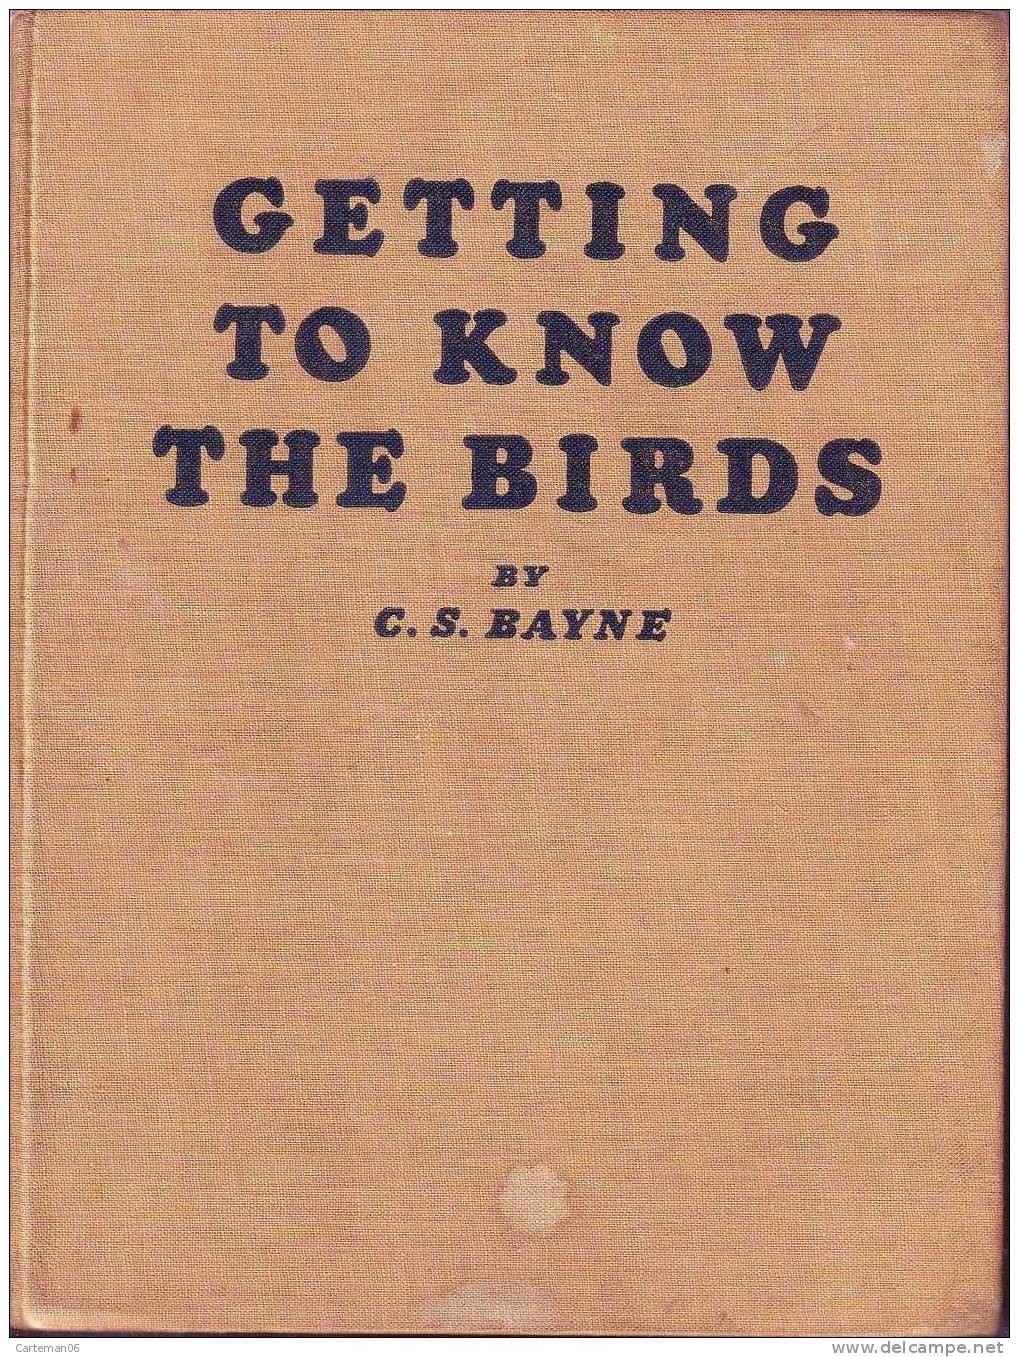 Livre - Getting To Know The Birds By C.S Bayne Illustrated By Ralston Gudgeon R.S.W 1944 (oiseaux) - Pet/ Animal Care